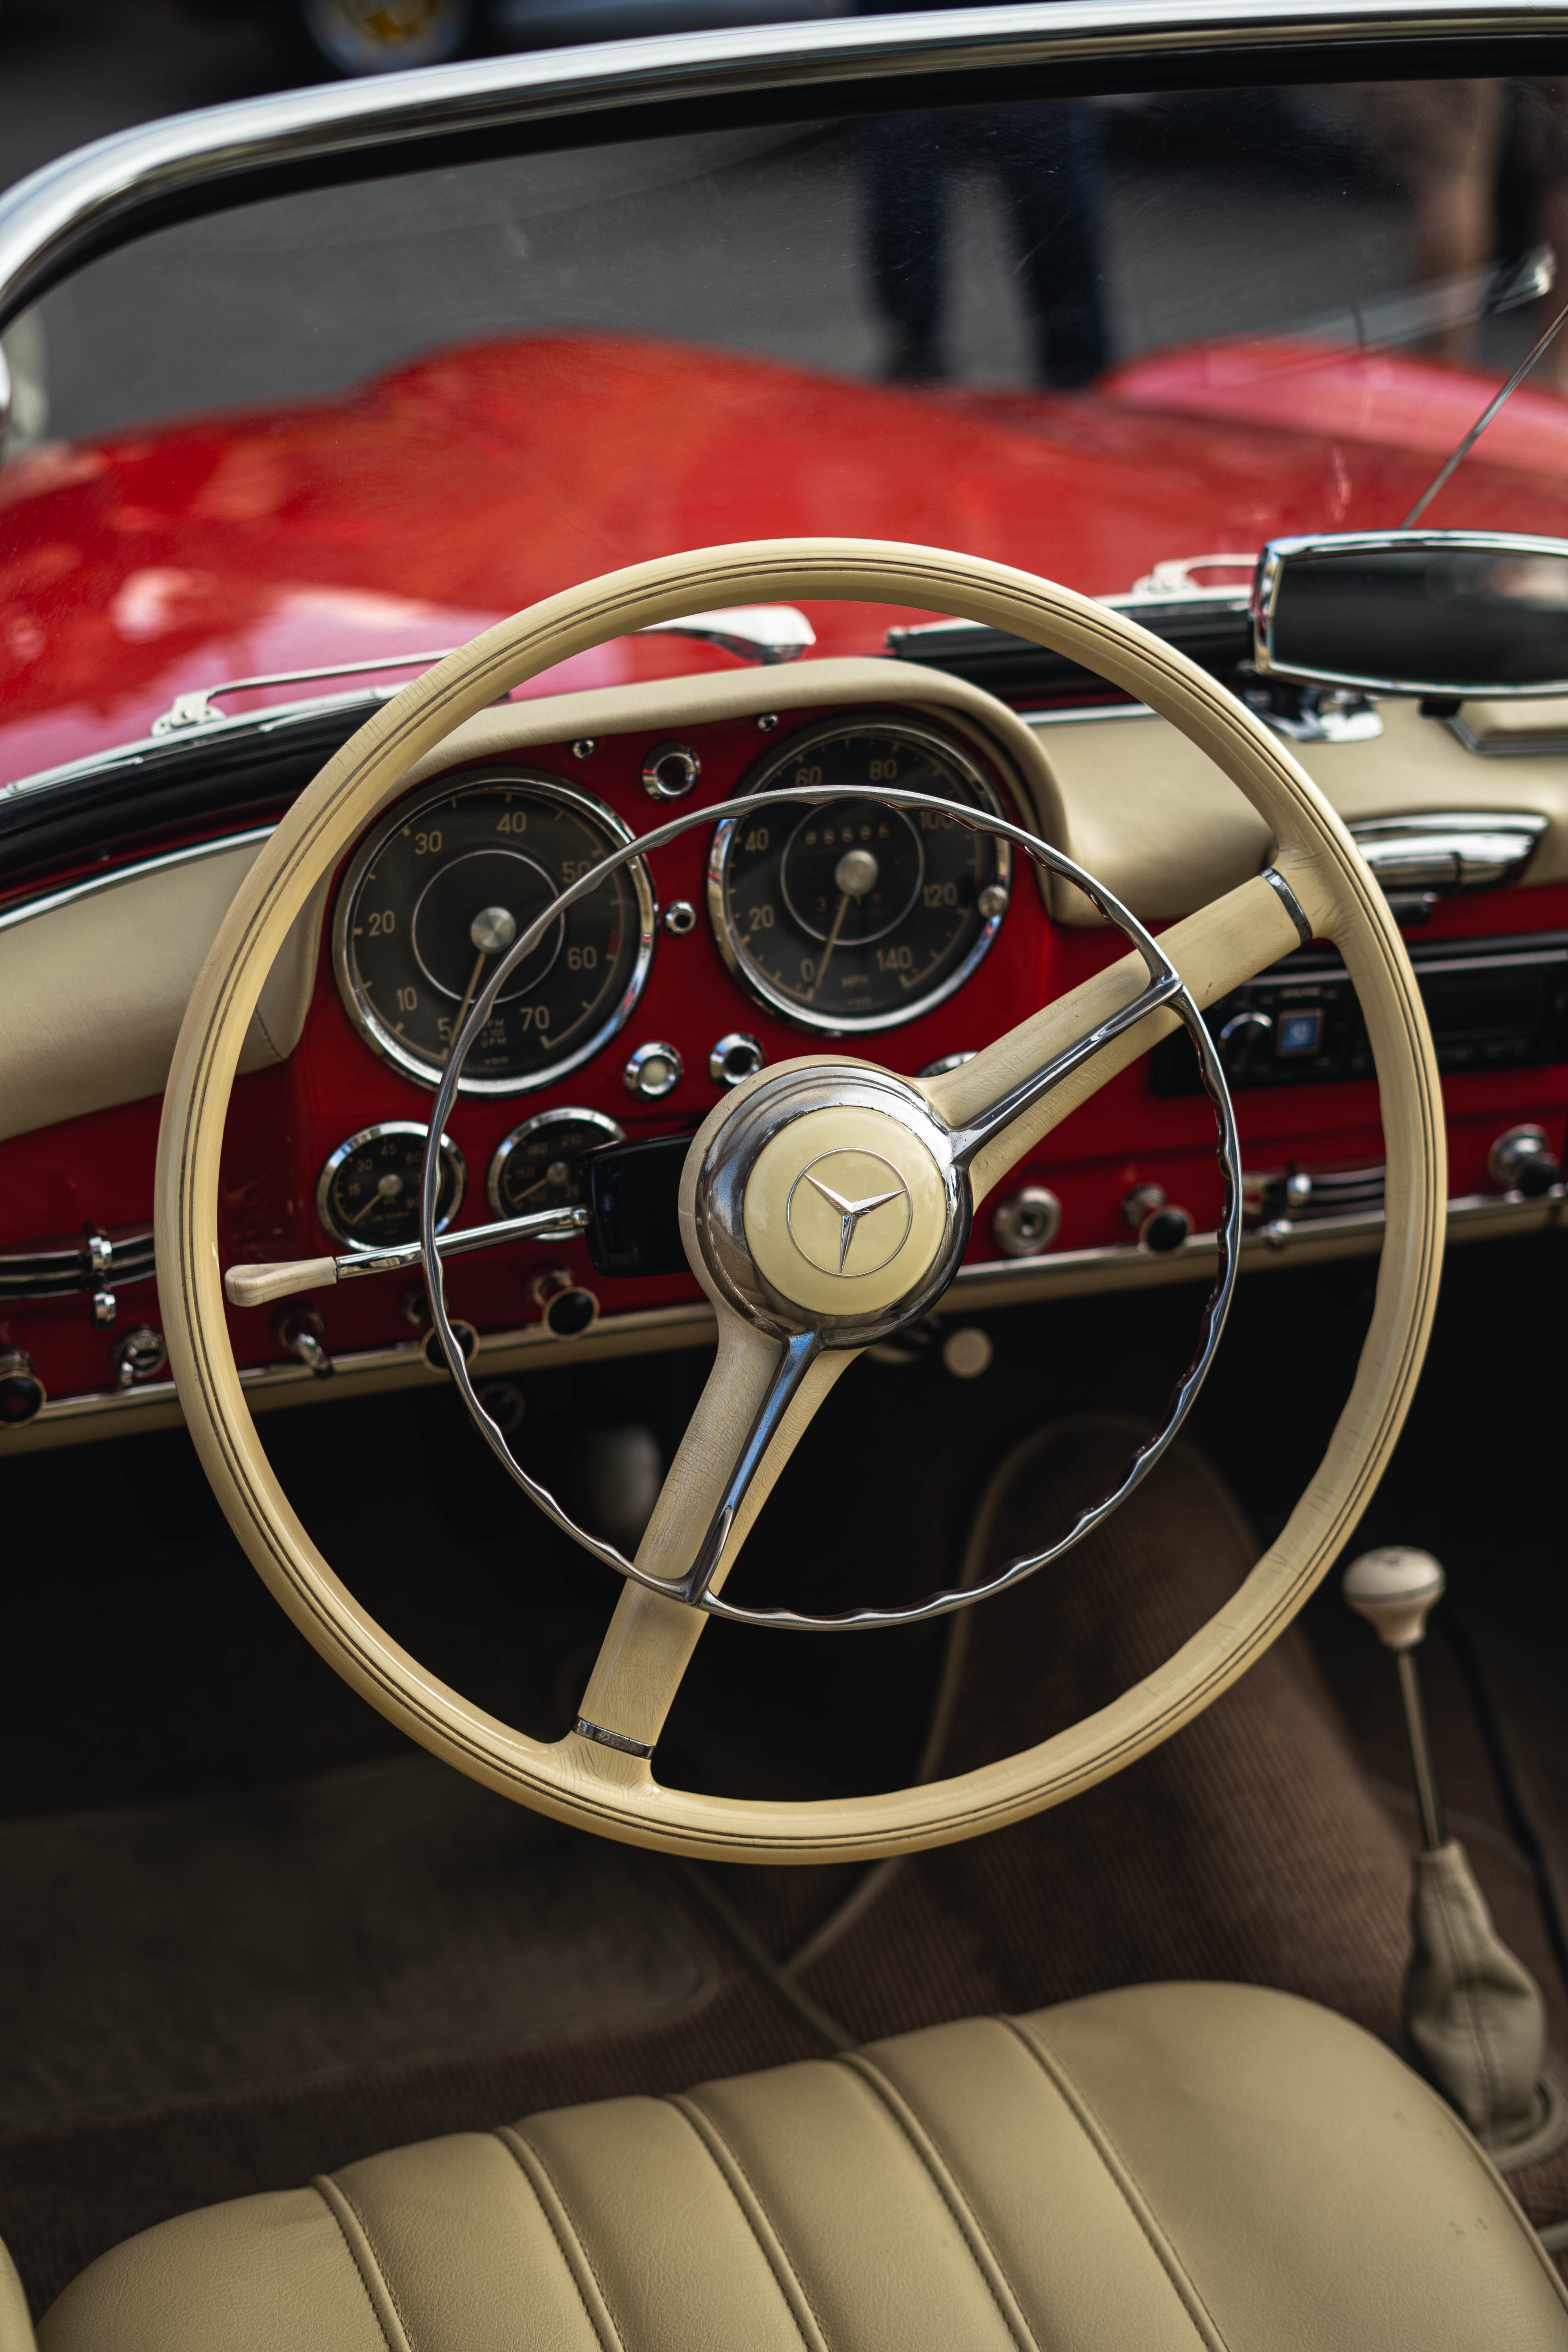 111683 Screensavers and Wallpapers Steering Wheel for phone. Download cars, car, vintage, mercedes, retro, steering wheel, rudder pictures for free